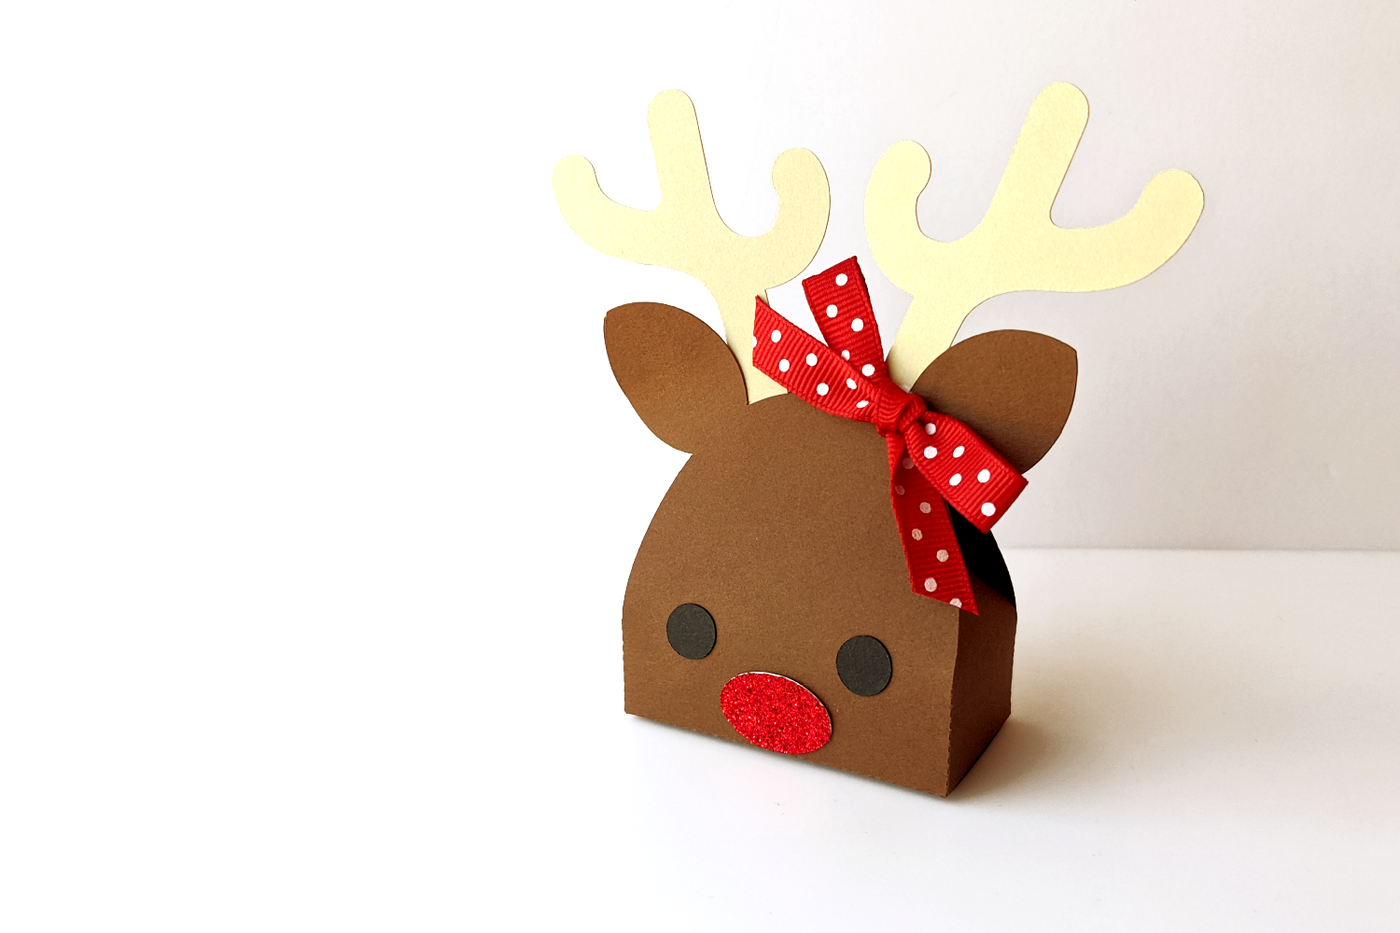 Christmas gift box in the shape of a reindeer face with antlers.